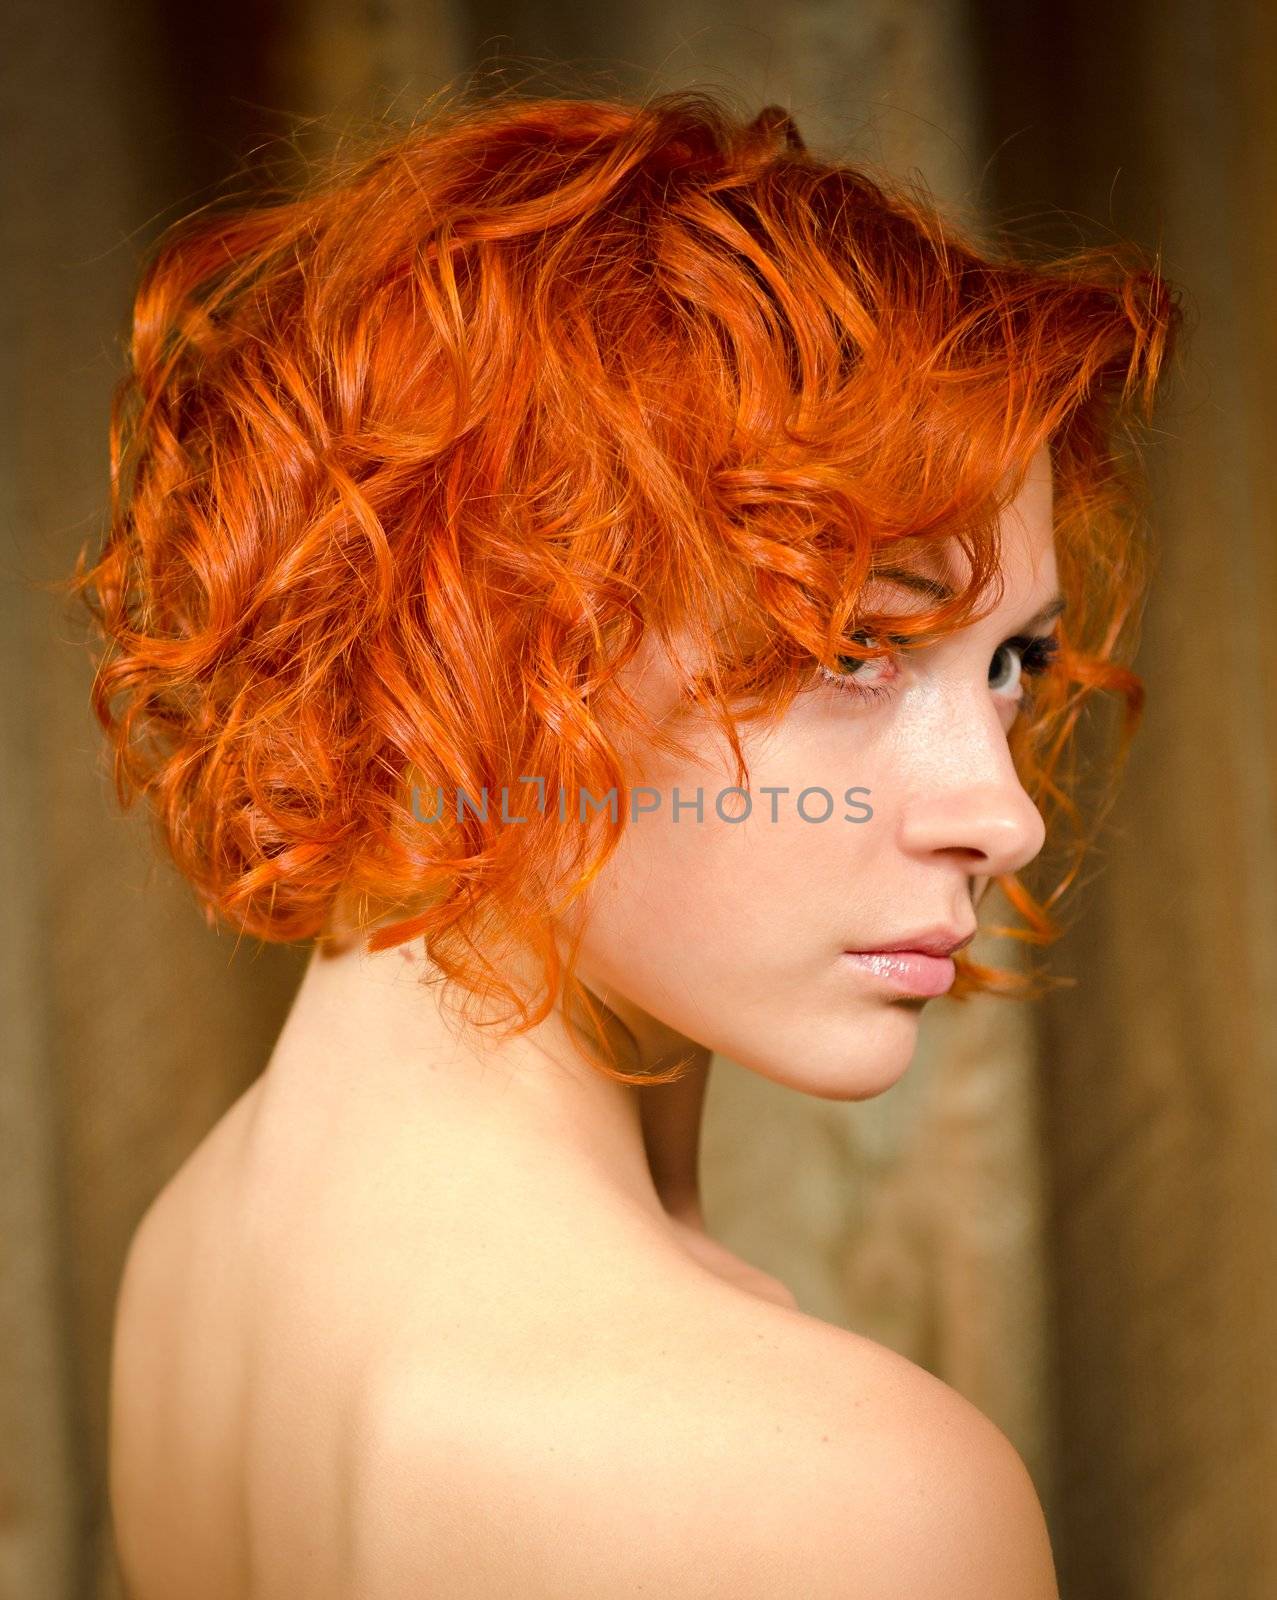 Beautiful curly red woman with bare shoulders